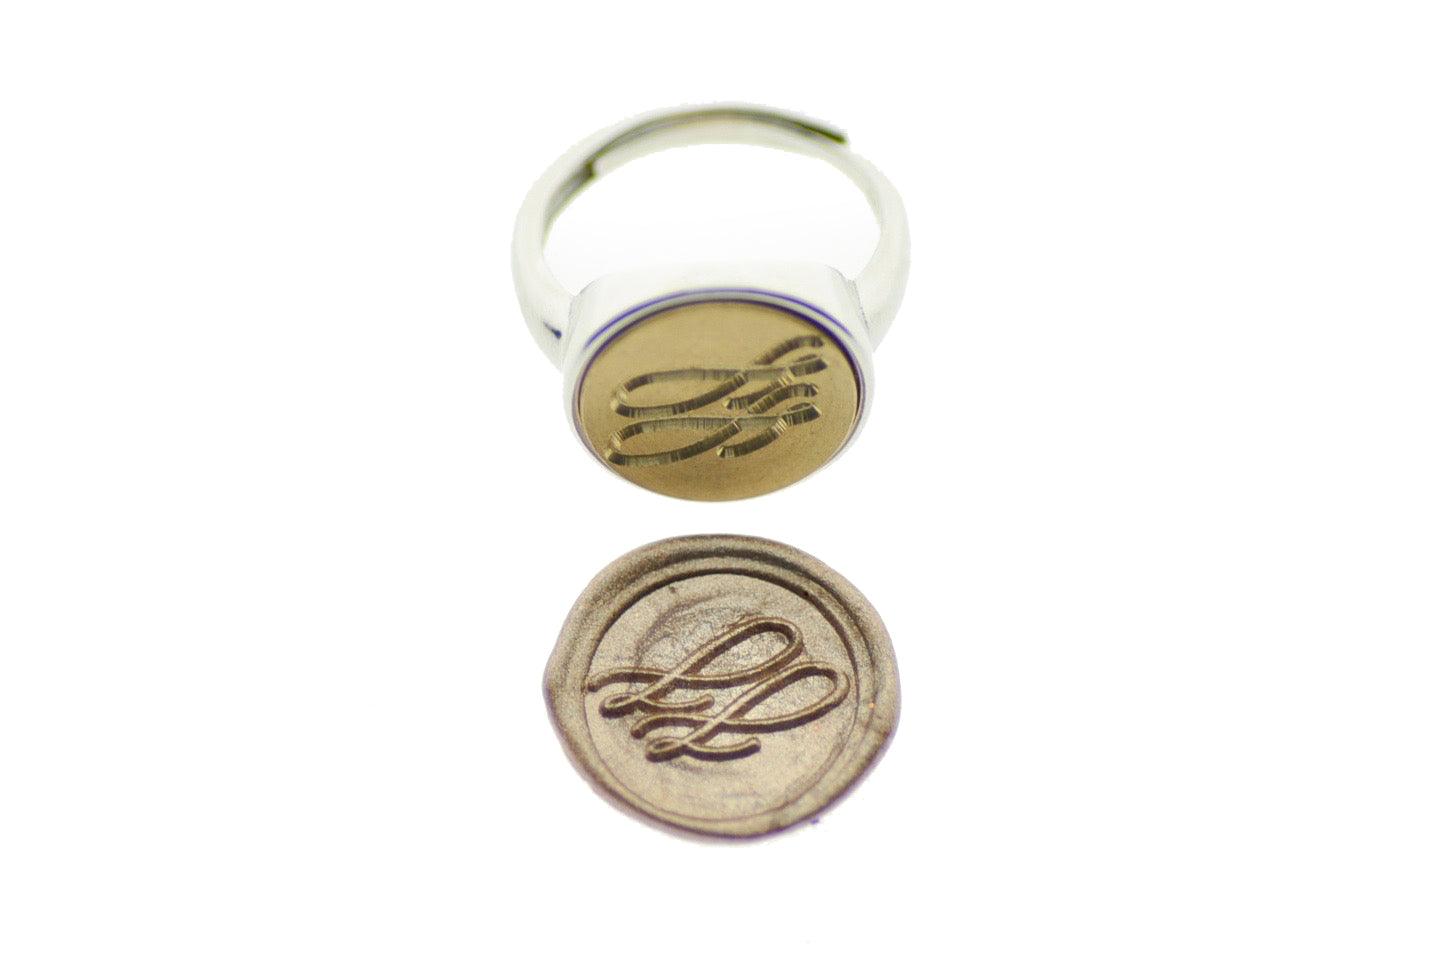 Linen & Leaf Modern Calligraphy Initials Signet Ring - Backtozero B20 - 14m, 14mm, 14mm ring, 14mn, 2 initials, 2initials_no_and, accessory, Calligraphy, collaboration, Double Initials, her, Initials, jewelry, minimal, Monogram, ring, signet ring, simple, size 10, size 7, size 8, size 9, Two initials, wax seal, wax seal stamp, Wedding